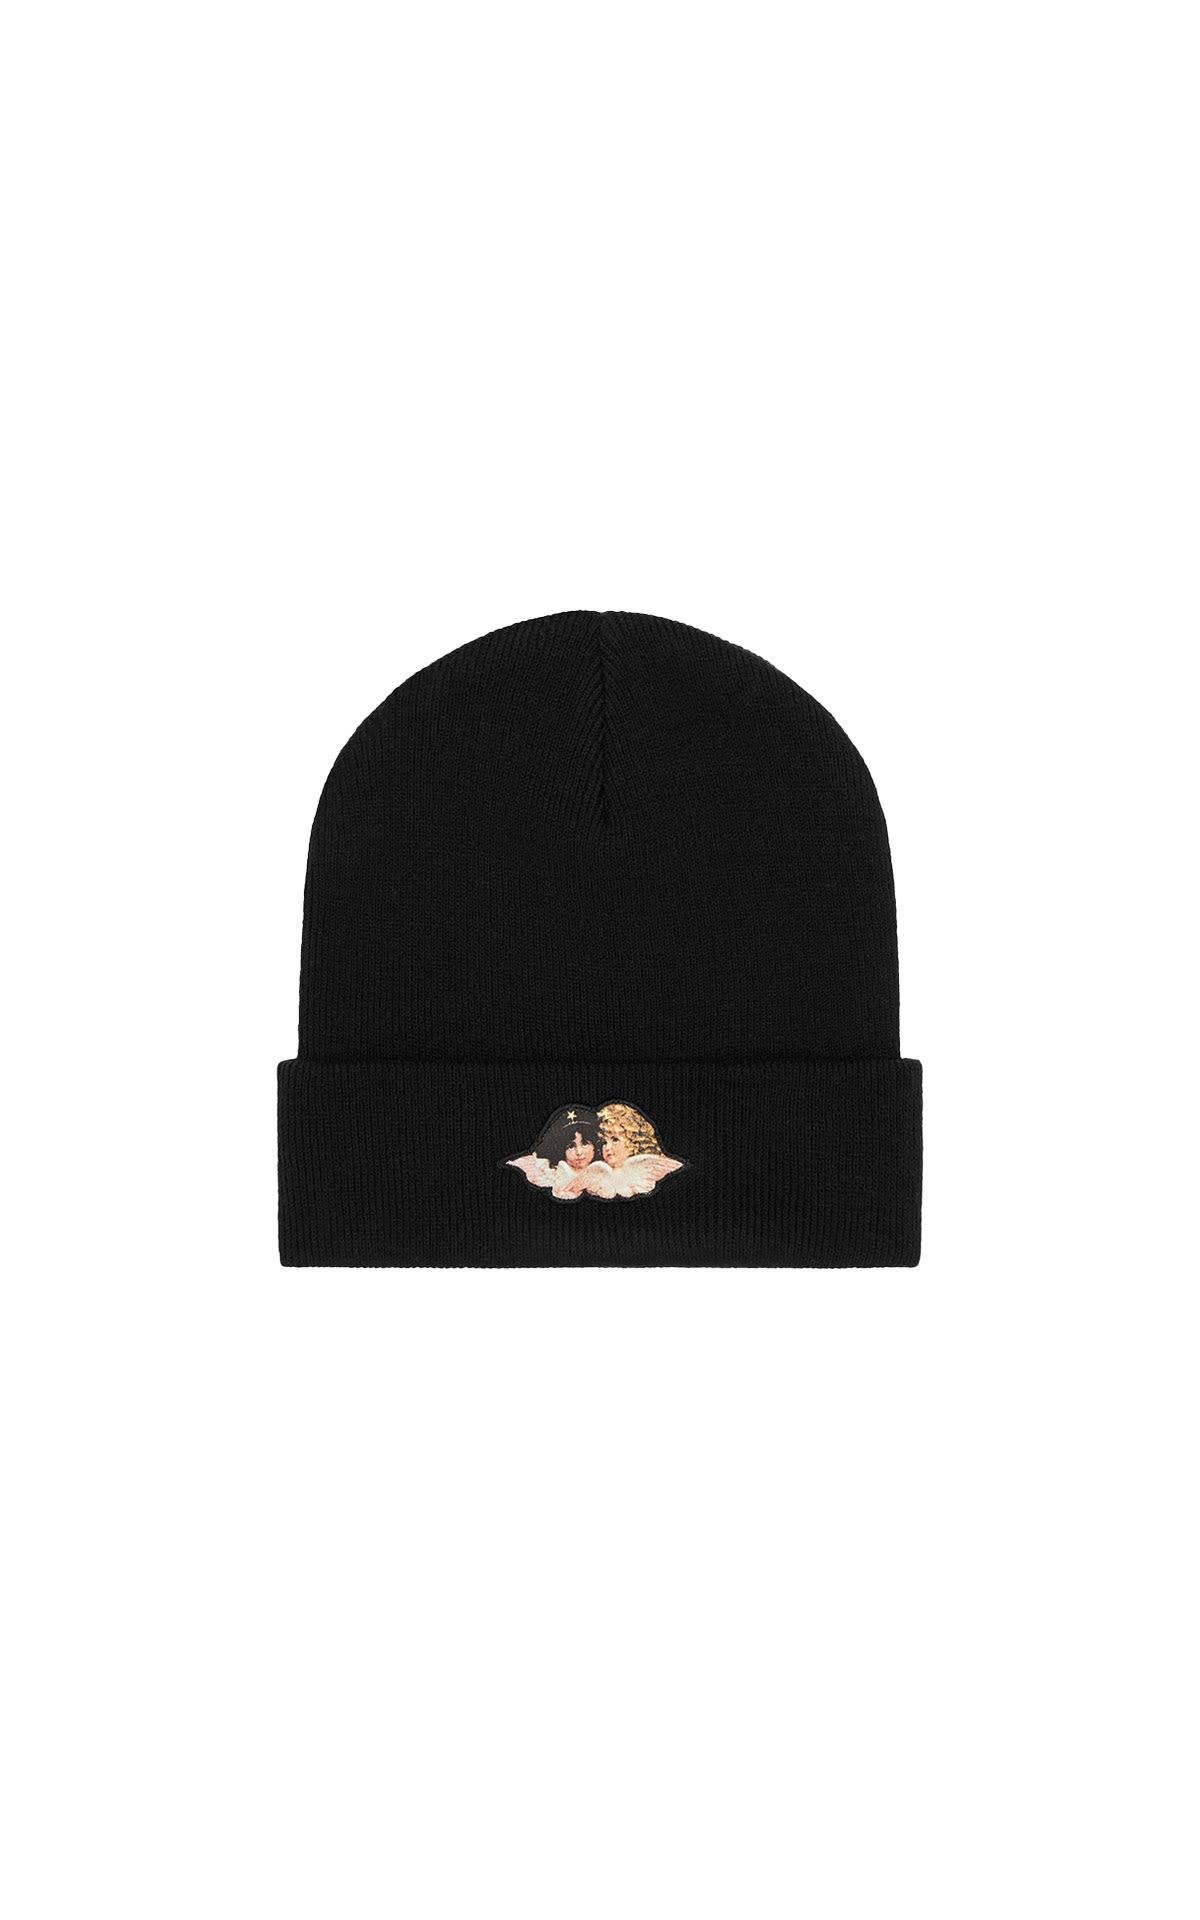 Fiorucci Angels patch beanie black from Bicester Village